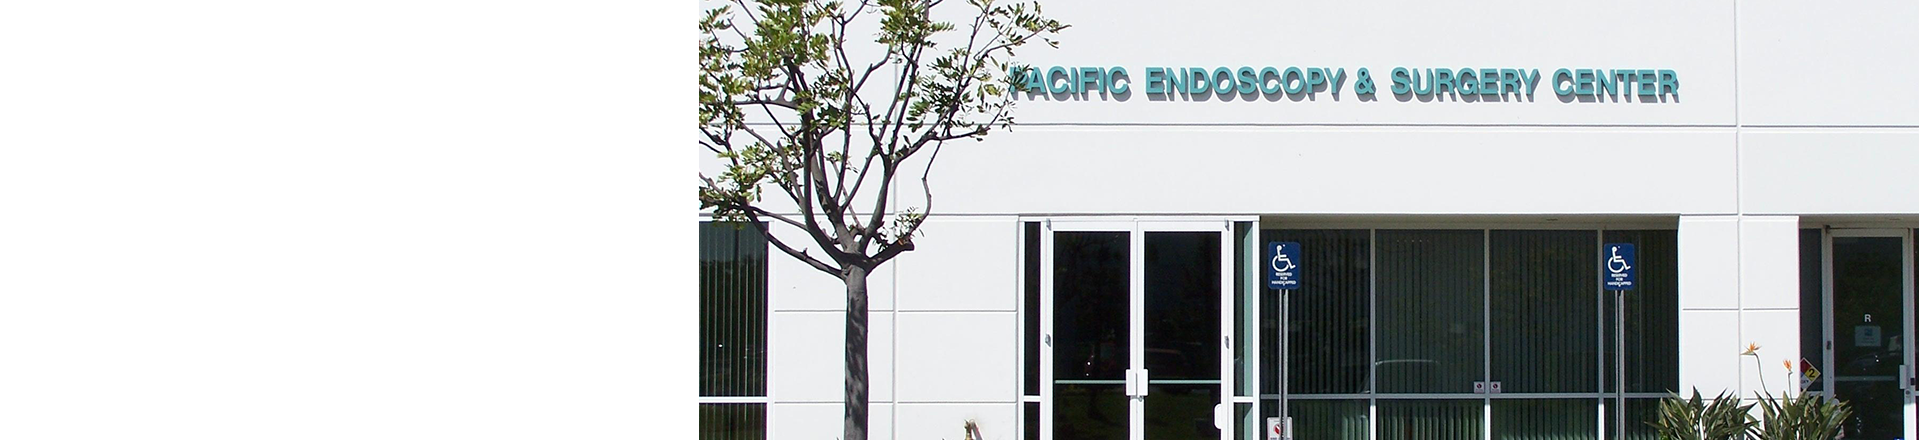 Pacific Endoscopy and Surgery Center